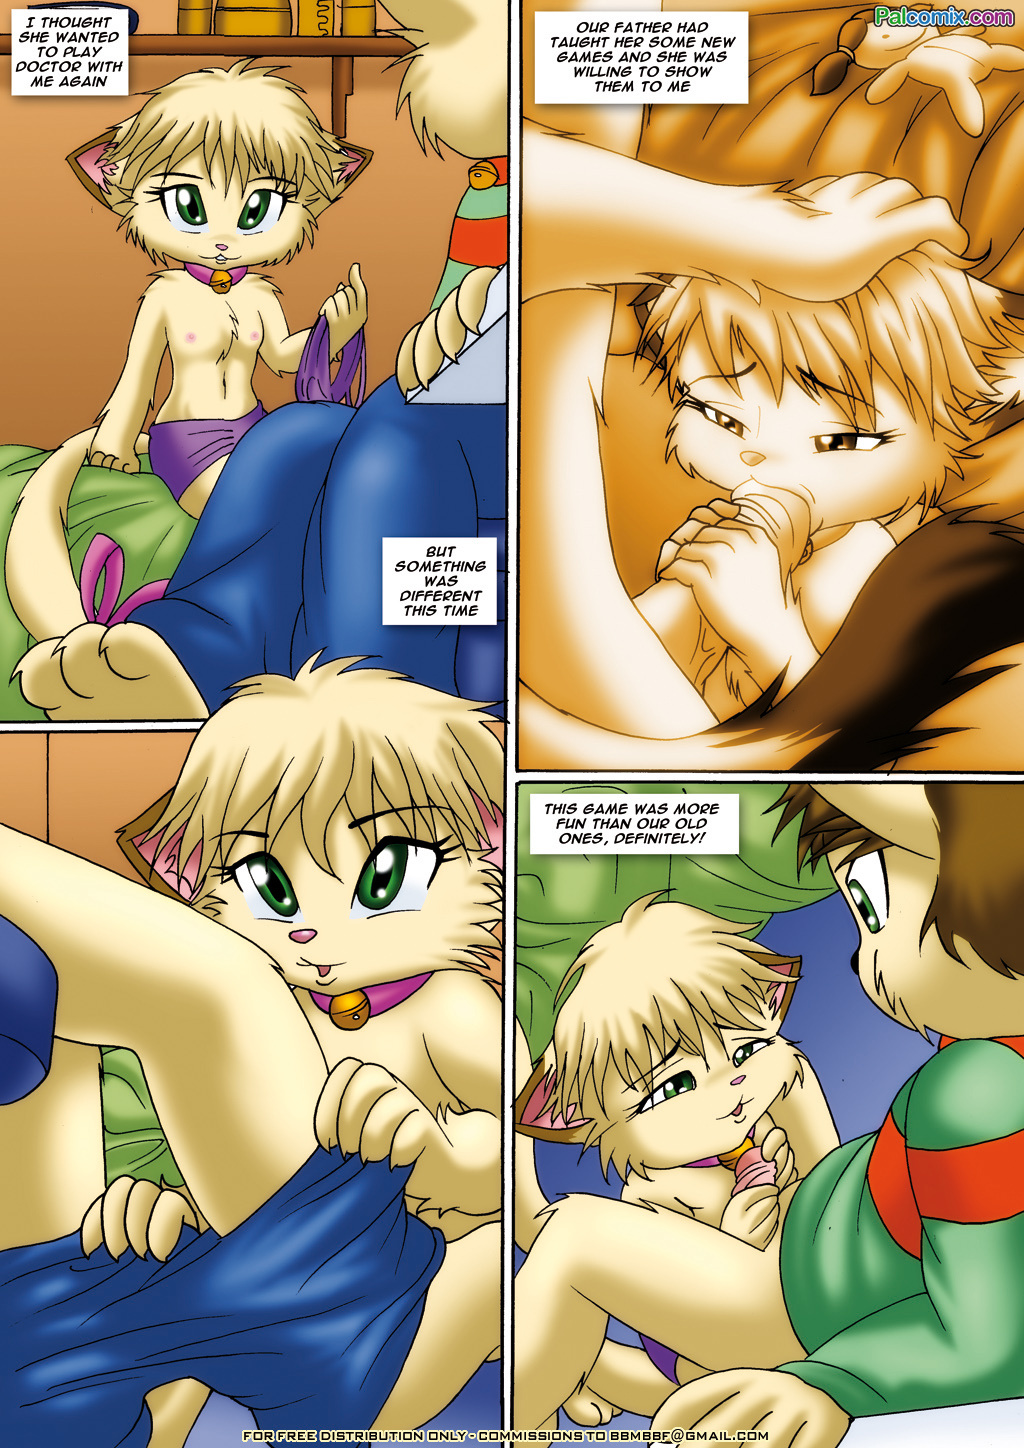 Those Good Old Games - Chapter 1 - Two Little Cubs porn comics Oral sex, Blowjob, cunnilingus, Furry, Group Sex, incest, Straight, Threesome